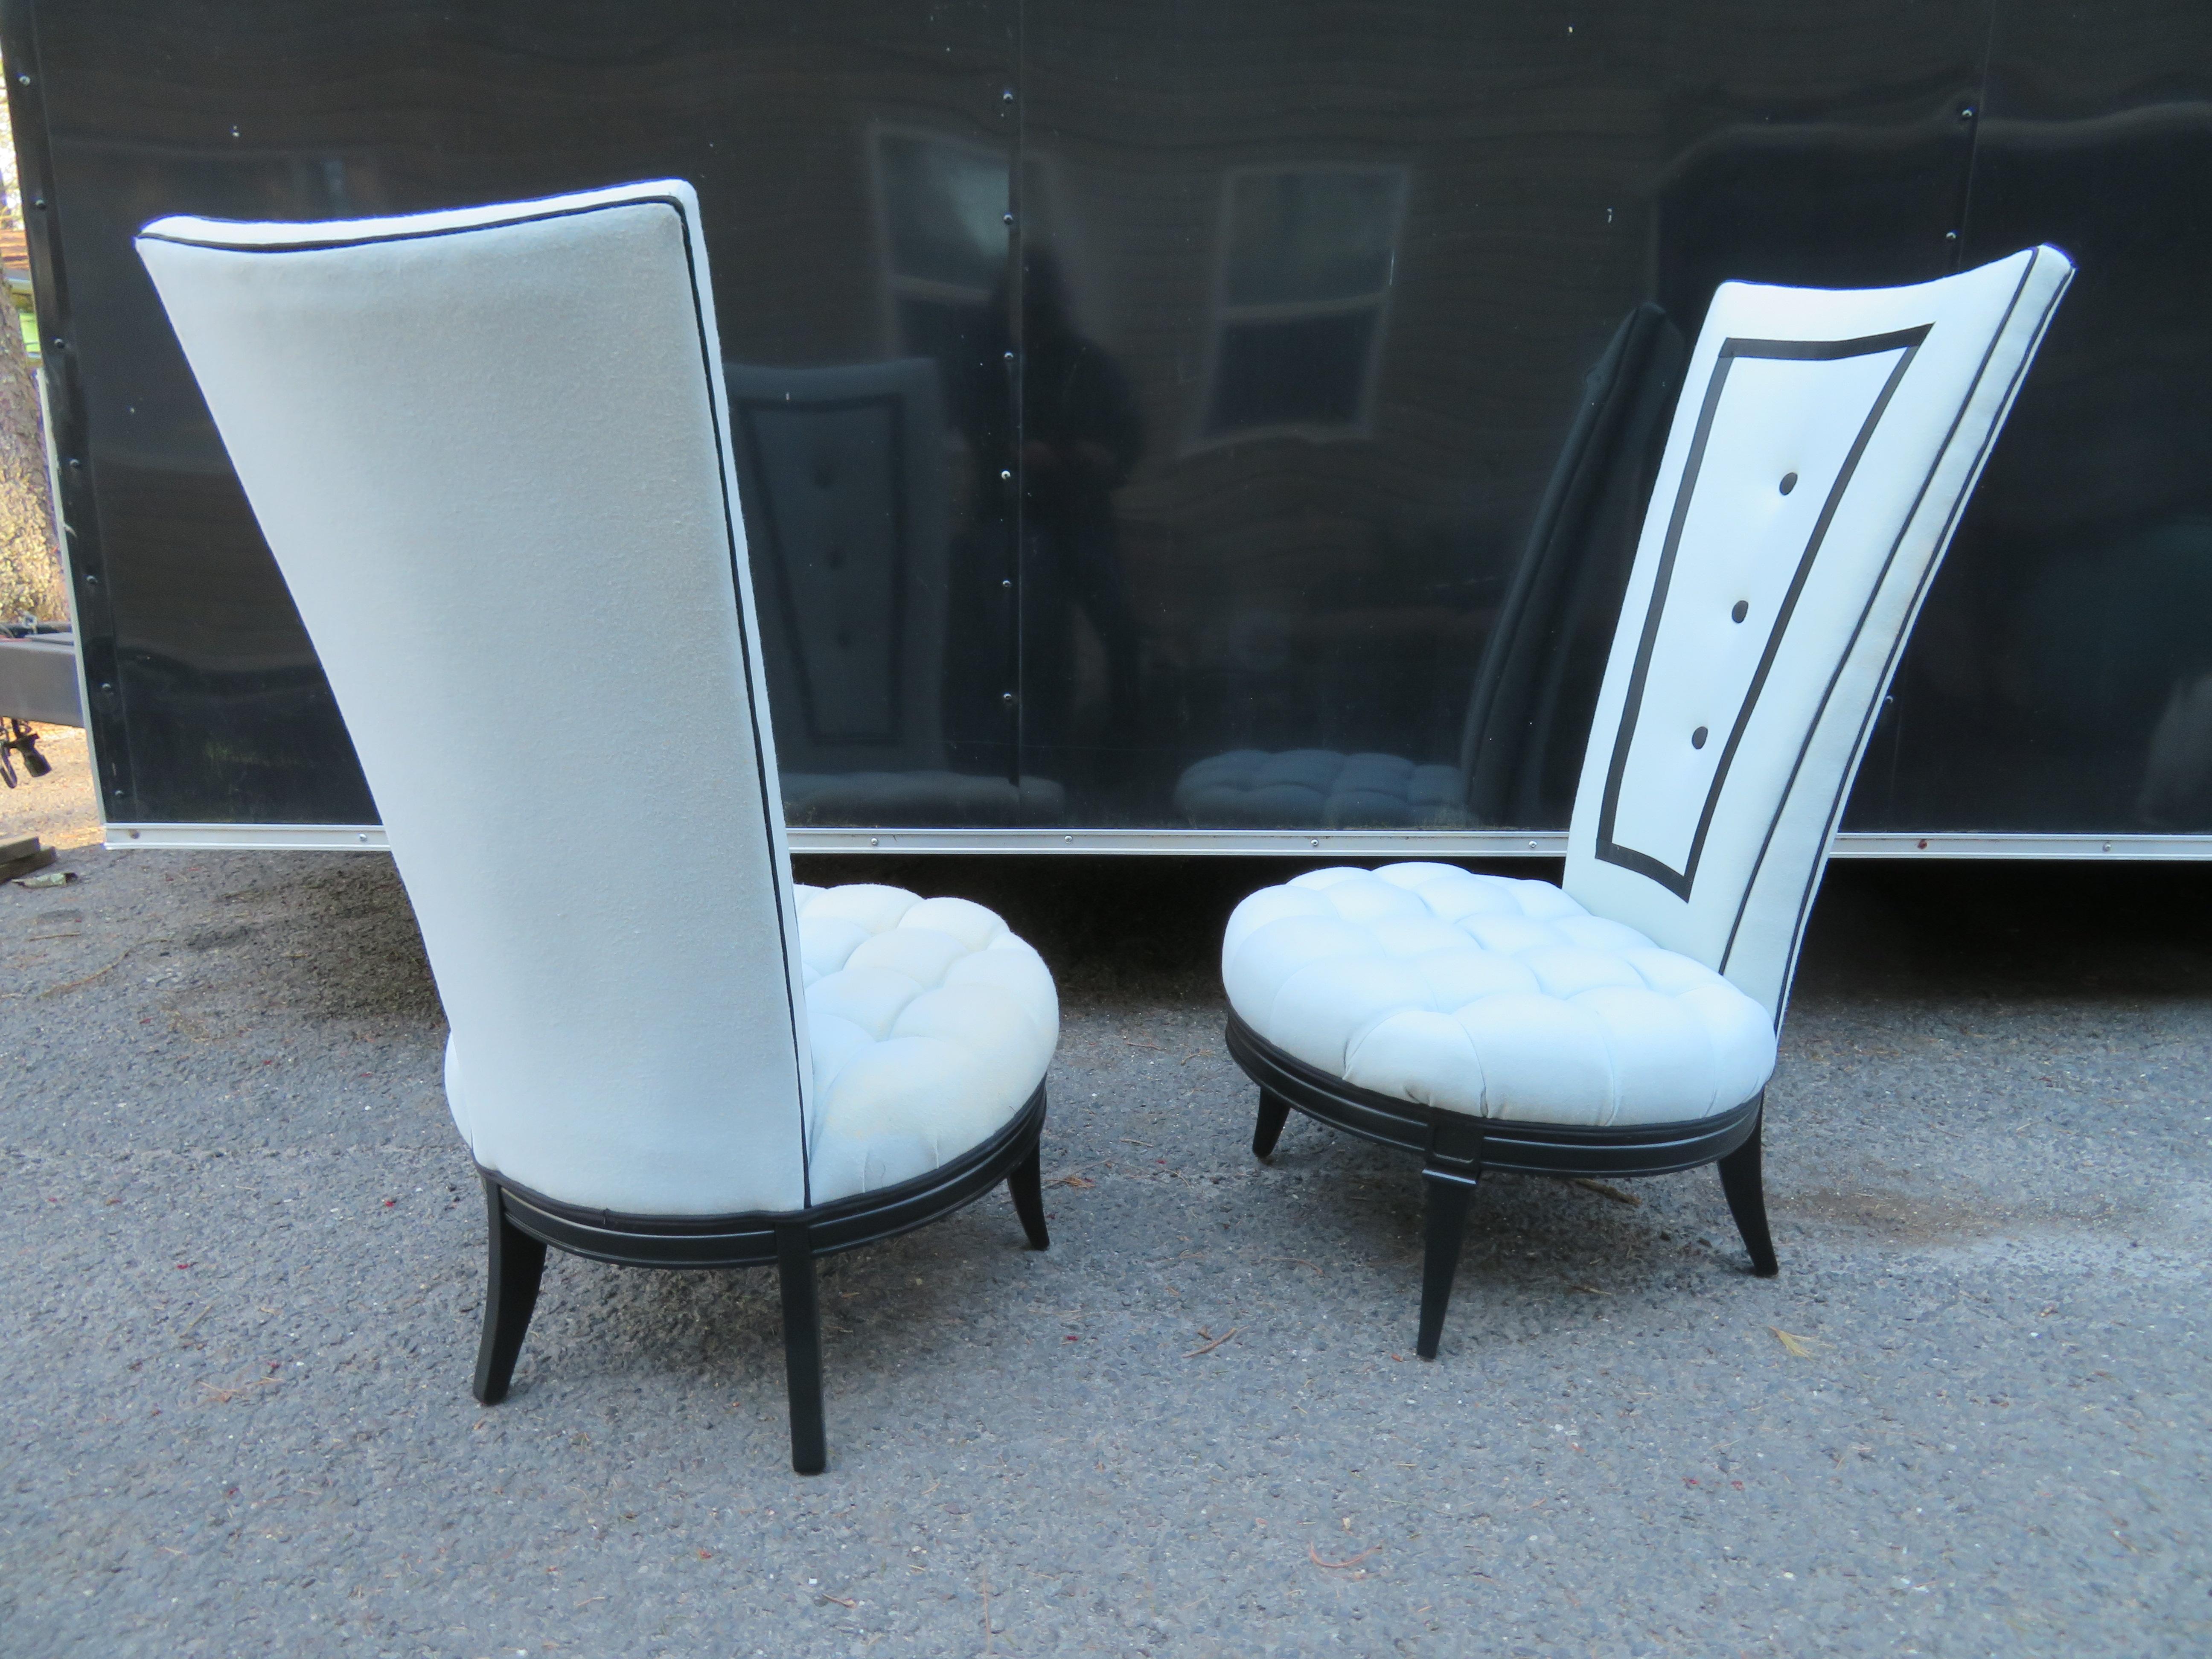 Handsome Pair Tuxedo Style Tall Back Tufted Slipper Chairs Hollywood Regency For Sale 7